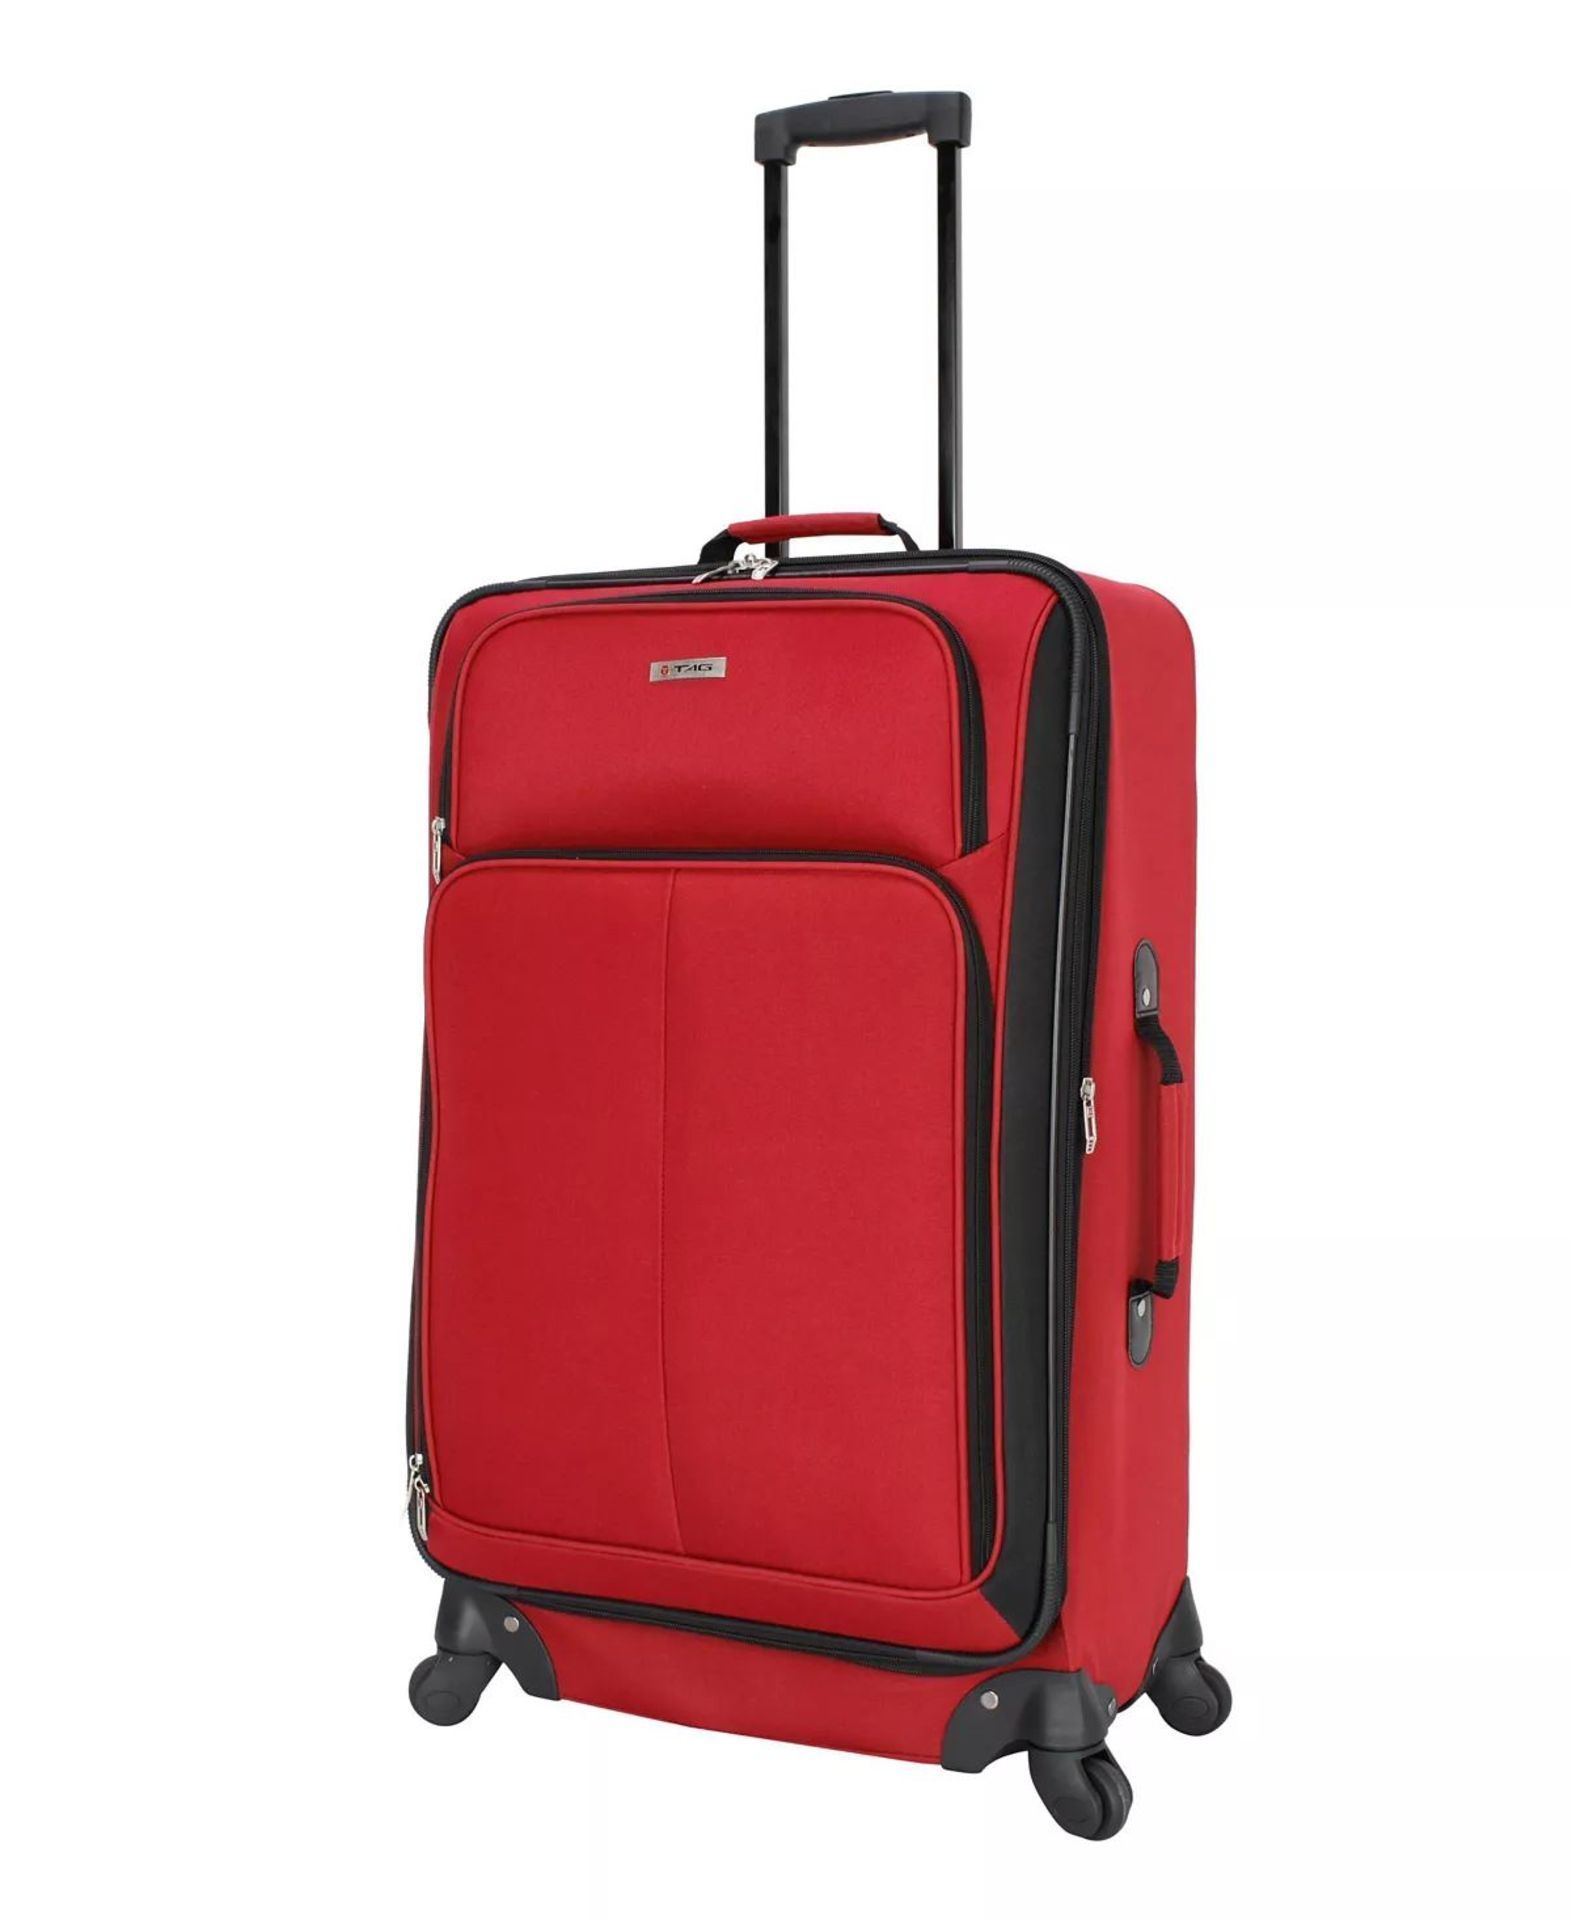 3 X NEW SETS OF TAG Ridgefield RED 5 Piece Softside Luggage Sets. RRP $300 per set, giving this - Image 5 of 5